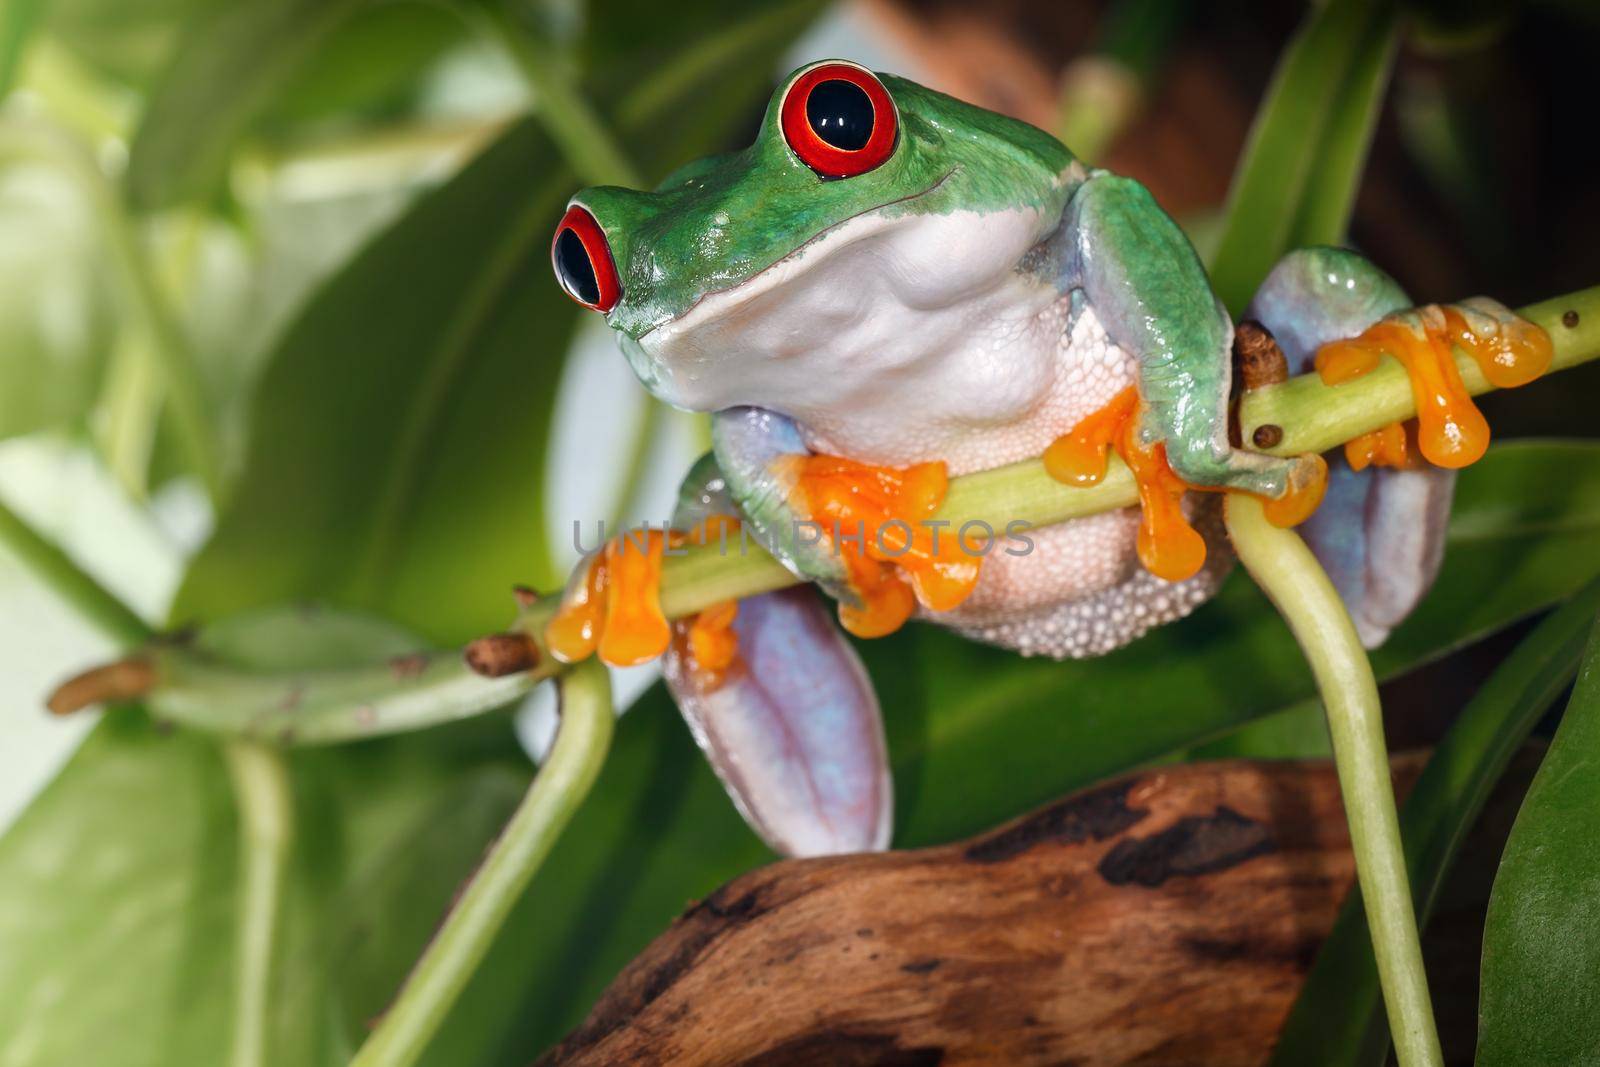 Red eyed tree frog sitting on the plant stem and swing by Lincikas